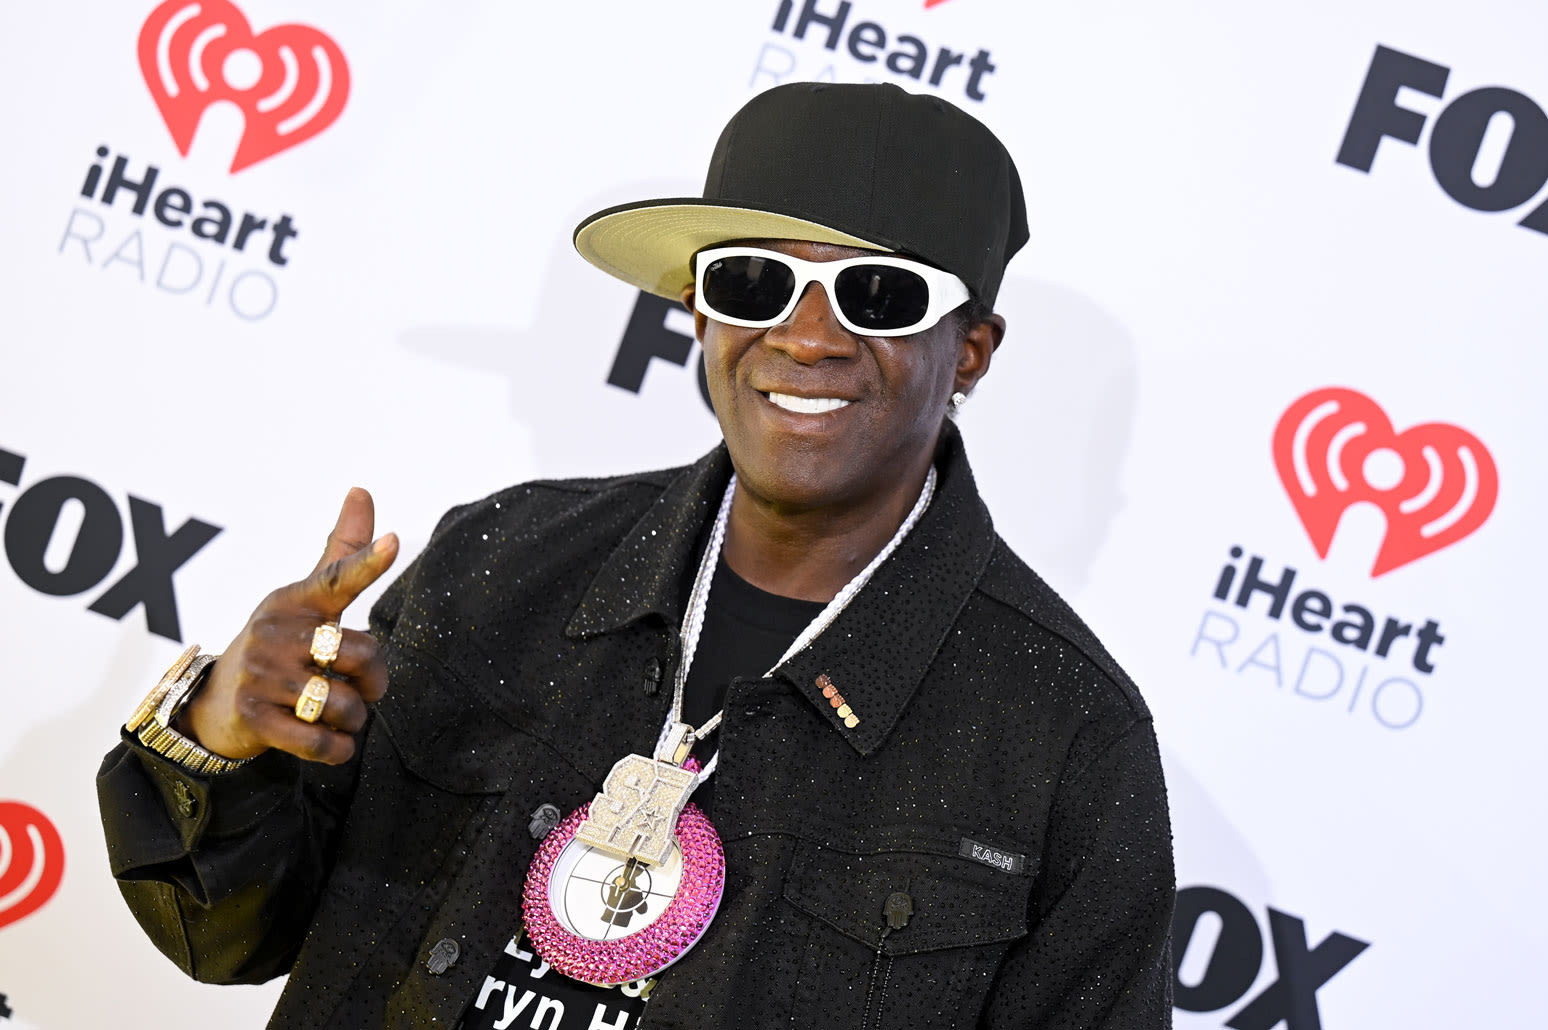 Flavor Flav Orders the Entire Red Lobster Menu in Effort to Save Company: See His Massive Meal